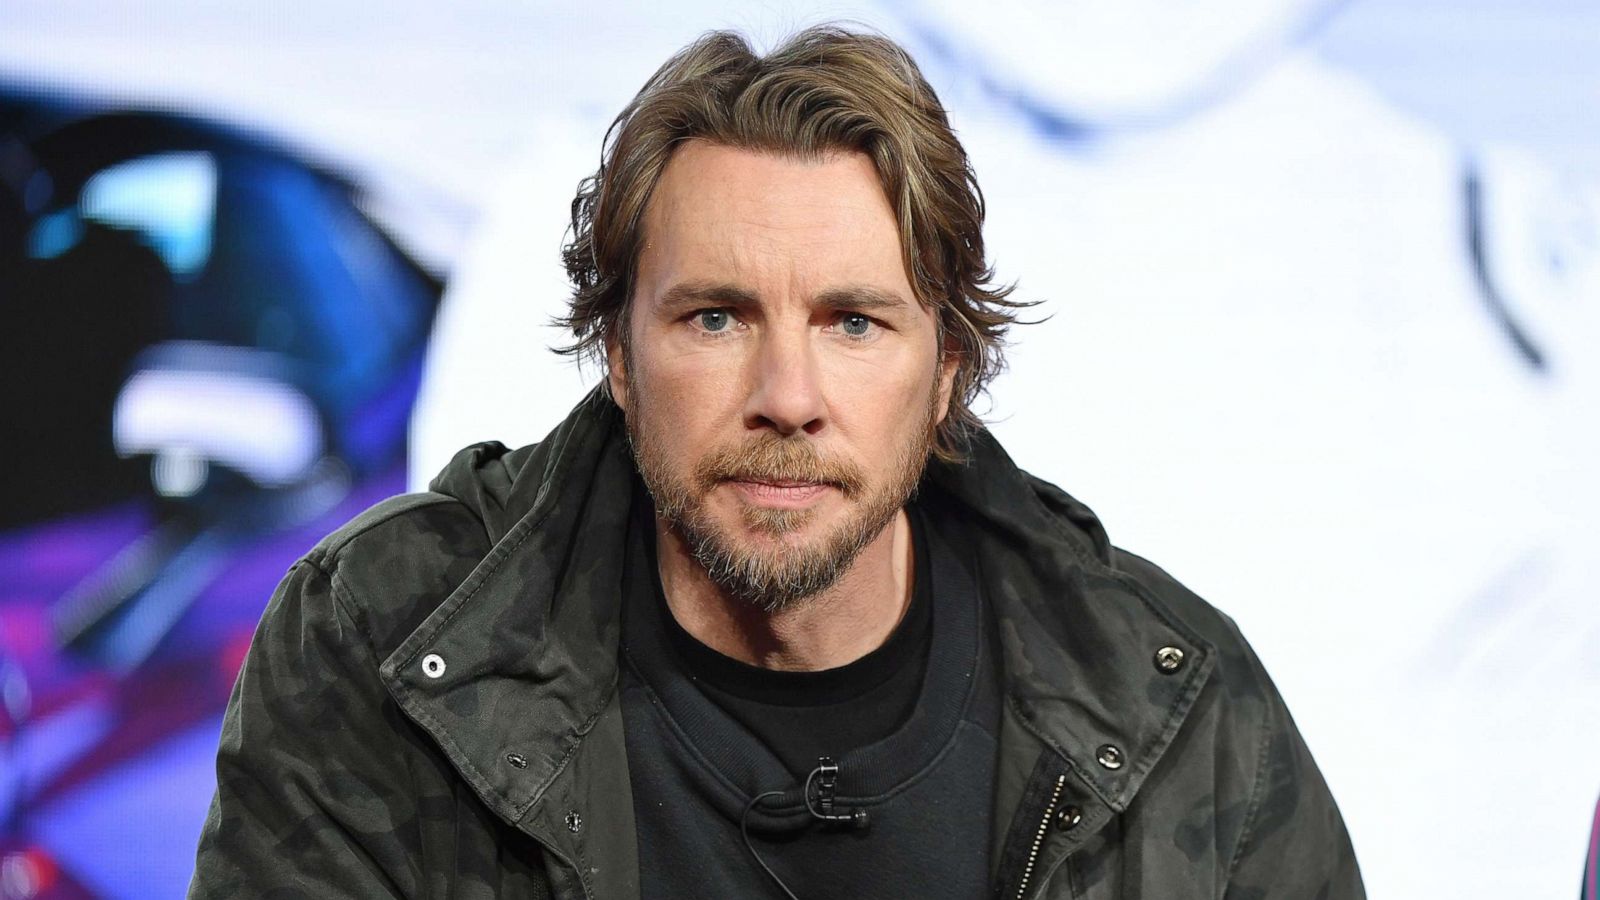 Dax Shepard reveals relapse after 16 years of sobriety during